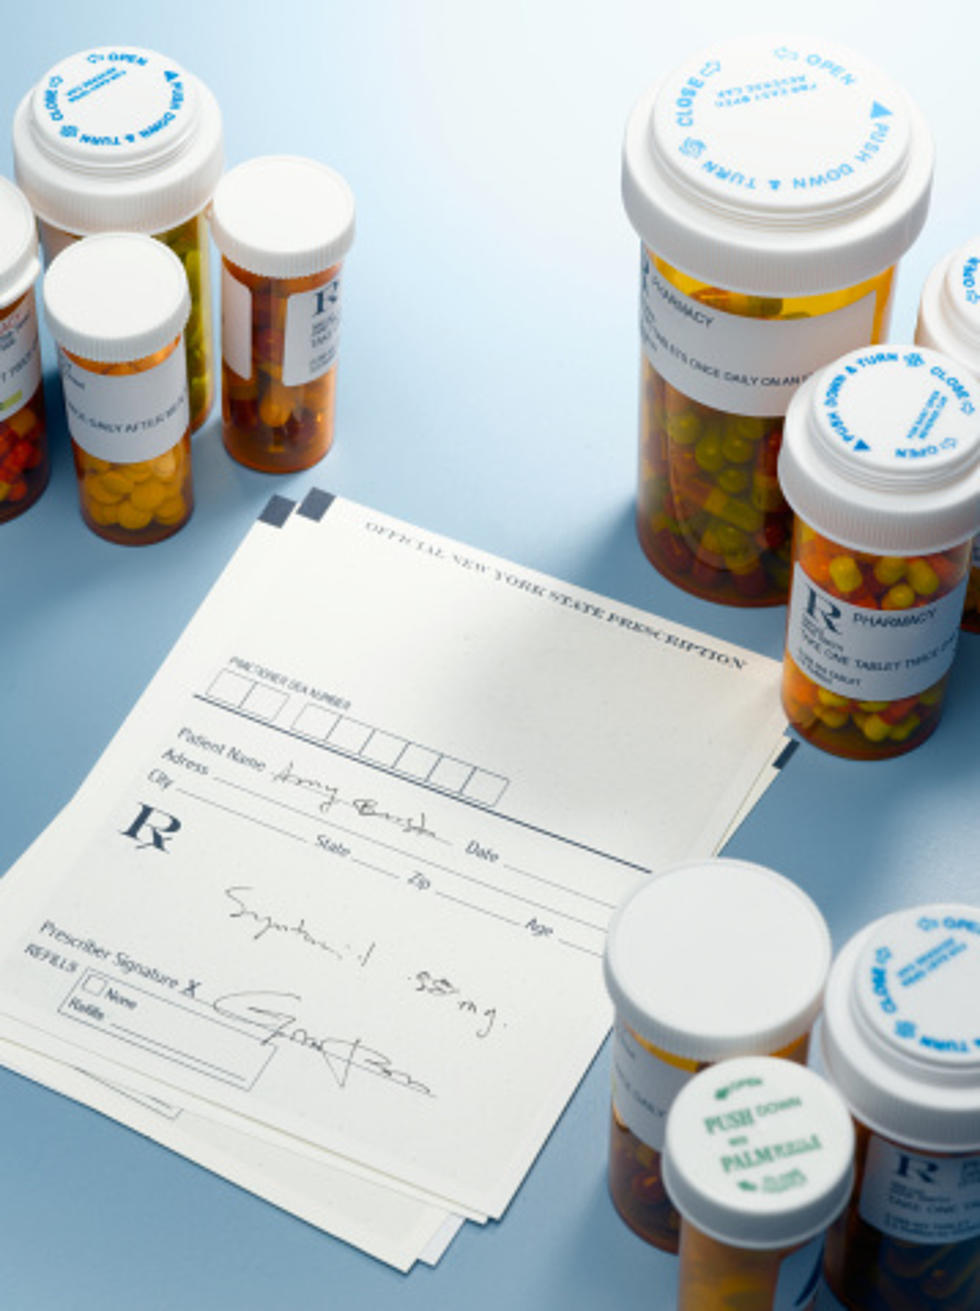 Get Rid of Your Expired Medications